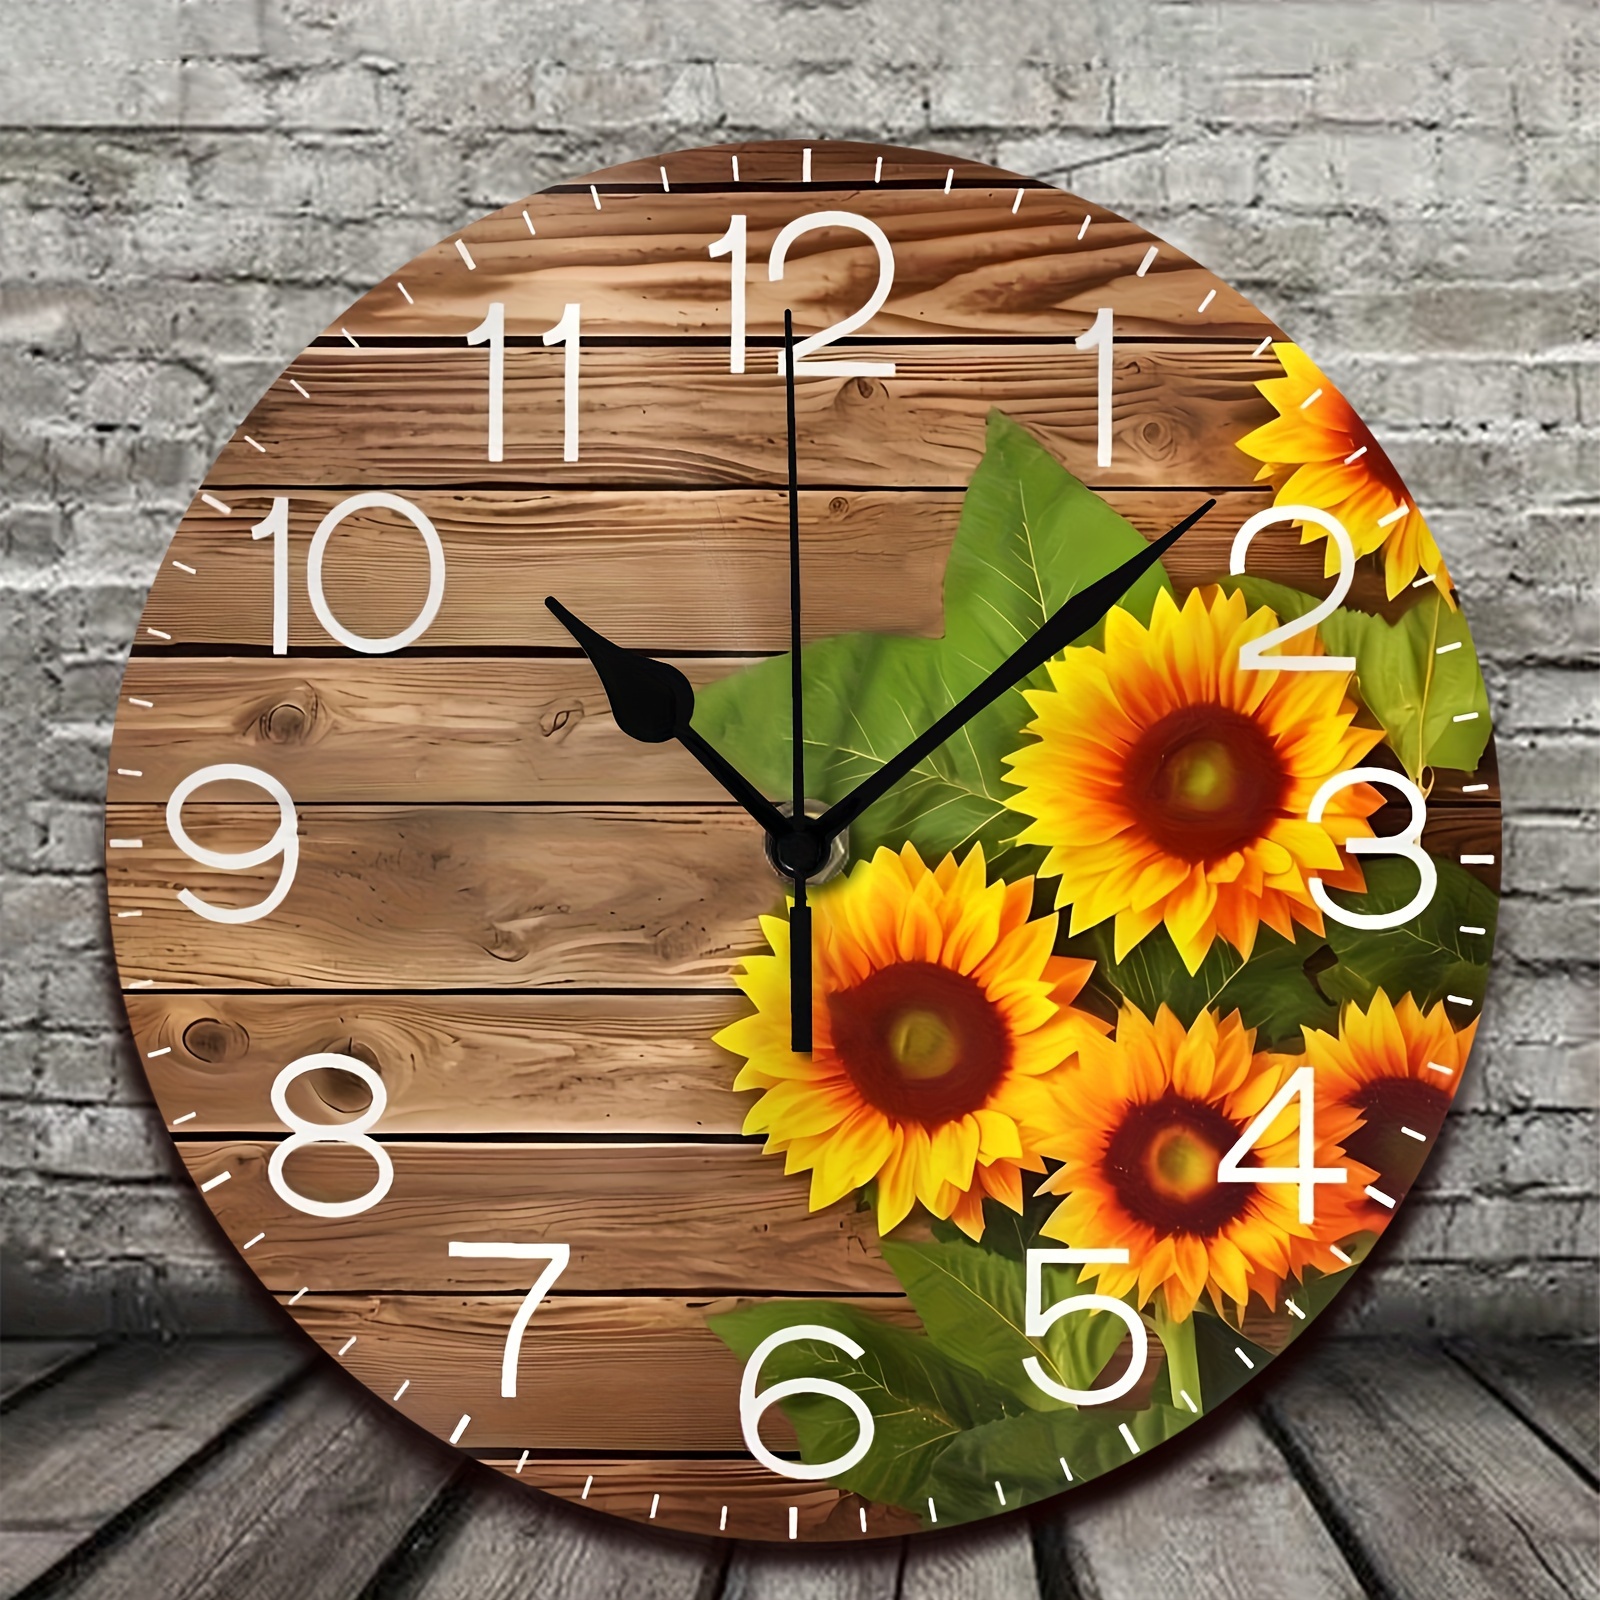 

1pc 10in Round Wall Clock, Sunflowers Silent Decorative Clocks, For Home Kitchen Bedroom Bathroom, Aa Battery (not Included)